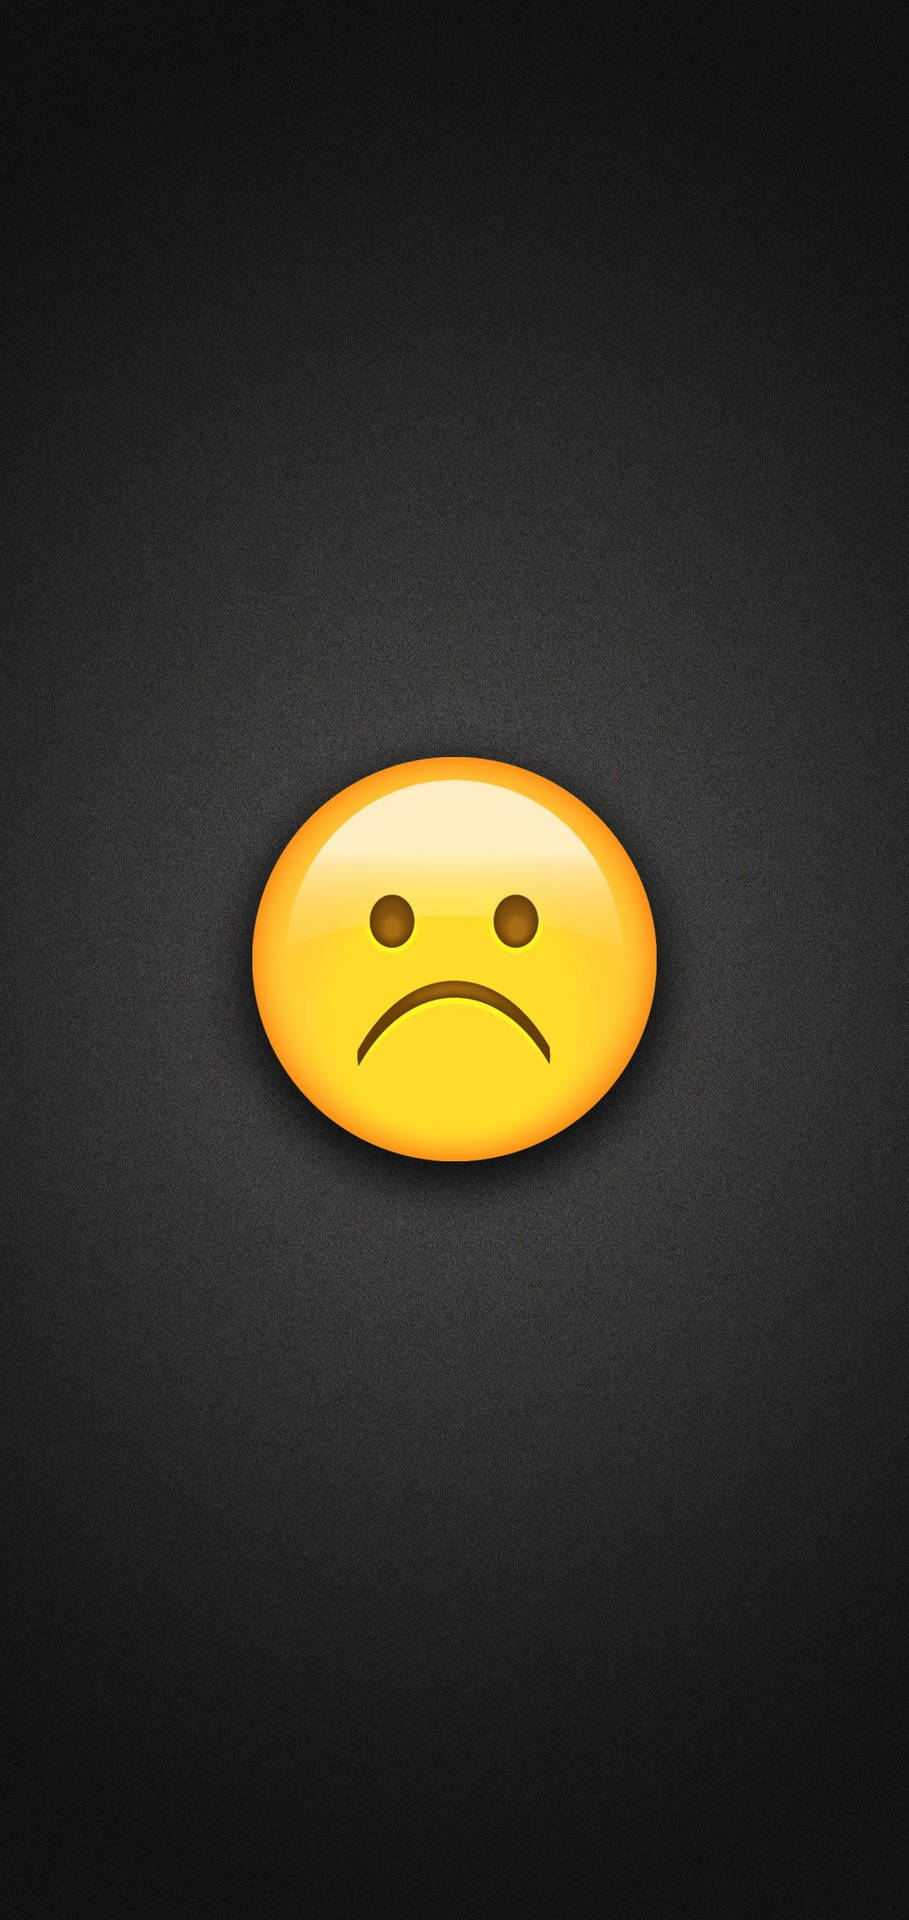 A sad face is shown on the screen - Emoji